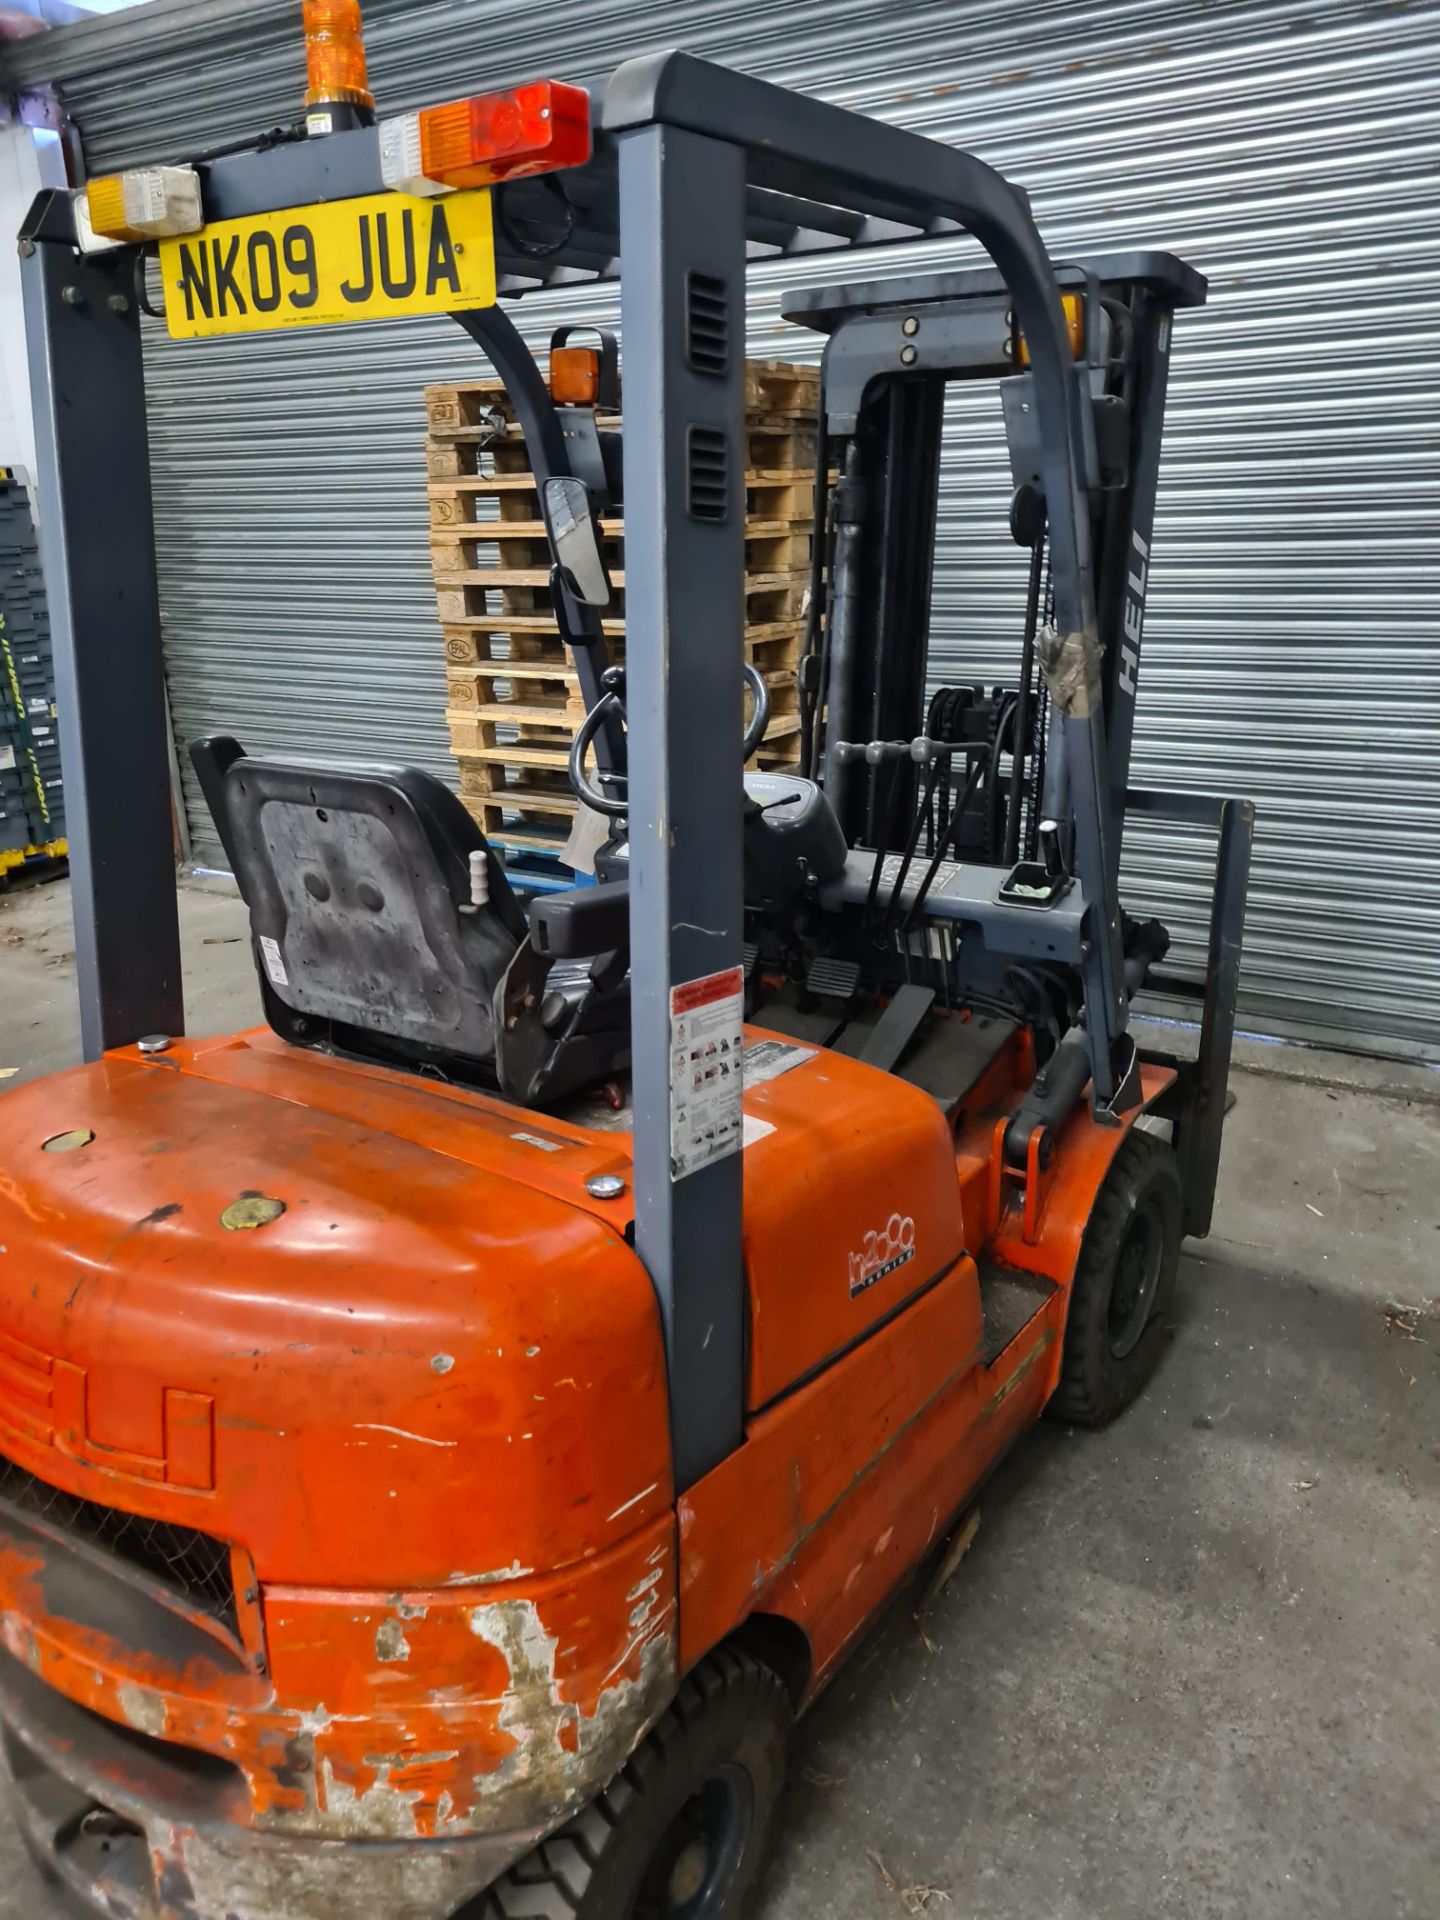 Heli HFD15 Diesel Forklift, serial no. H7433, SWL 1500kg, lift height 4.5m, hours unknown. ( - Image 2 of 3